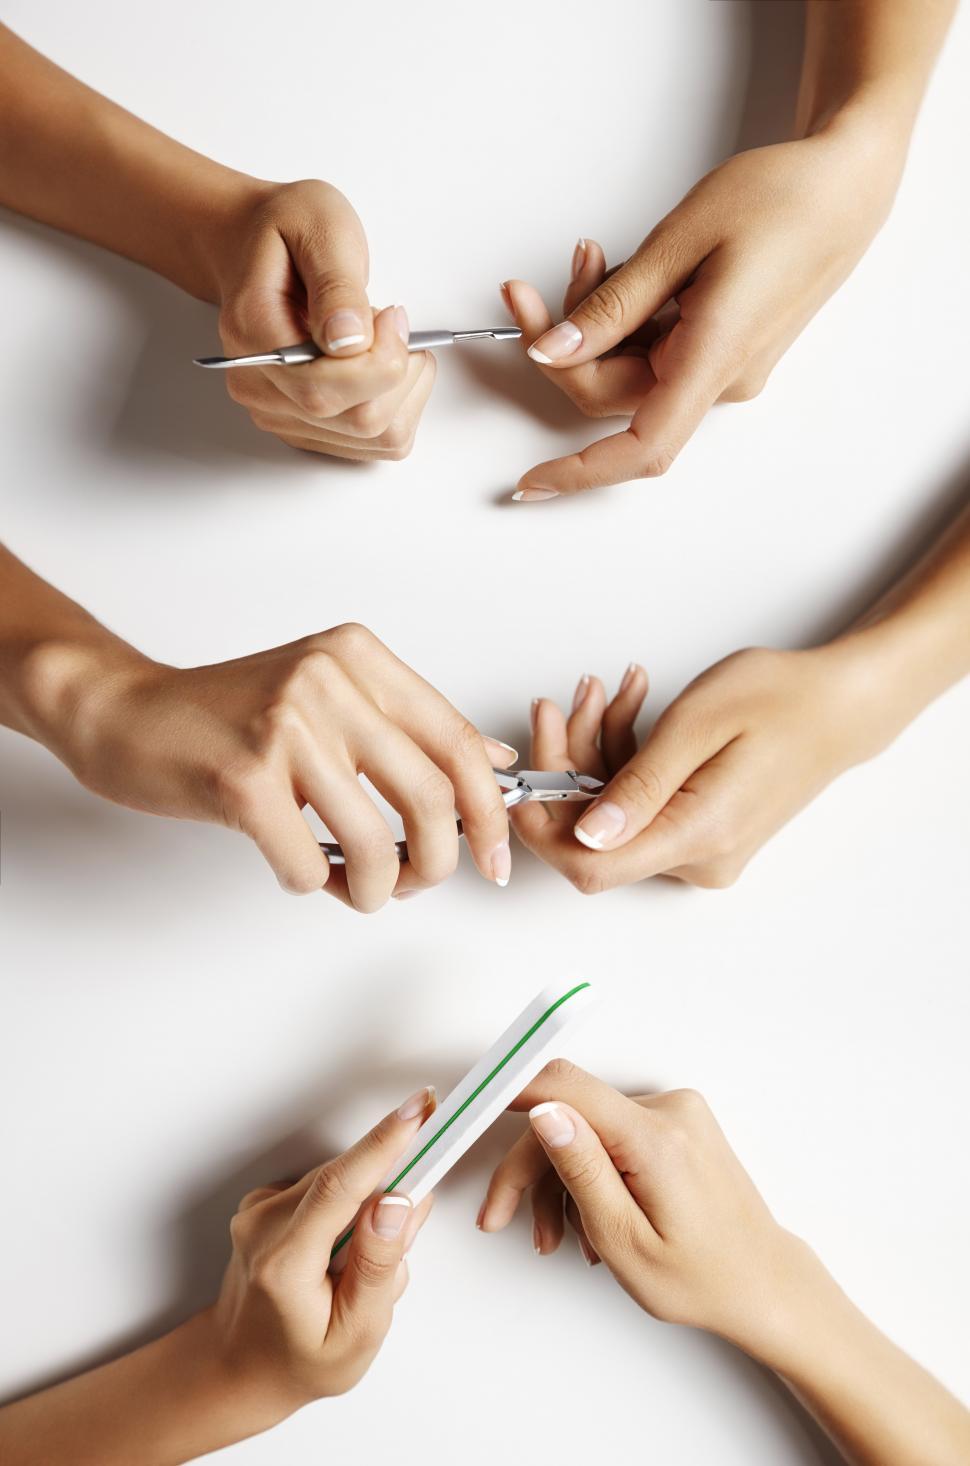 Free Image of Female hands showing process of a manicure, white background 